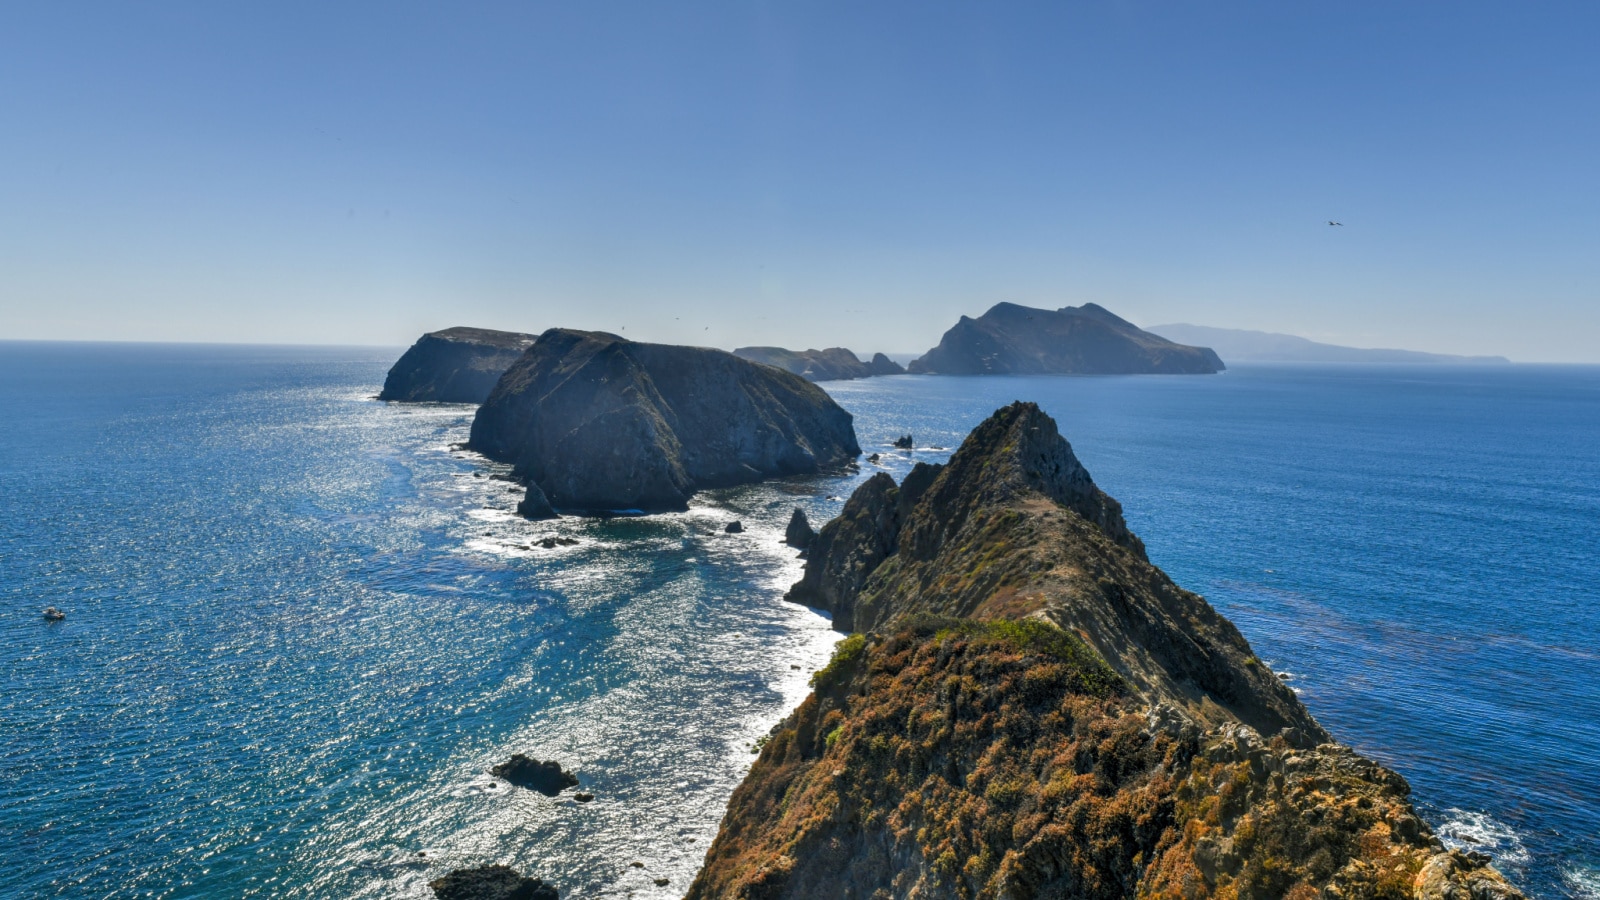 View from Inspiration Point, Anacapa island, California in Channel Islands National Park.